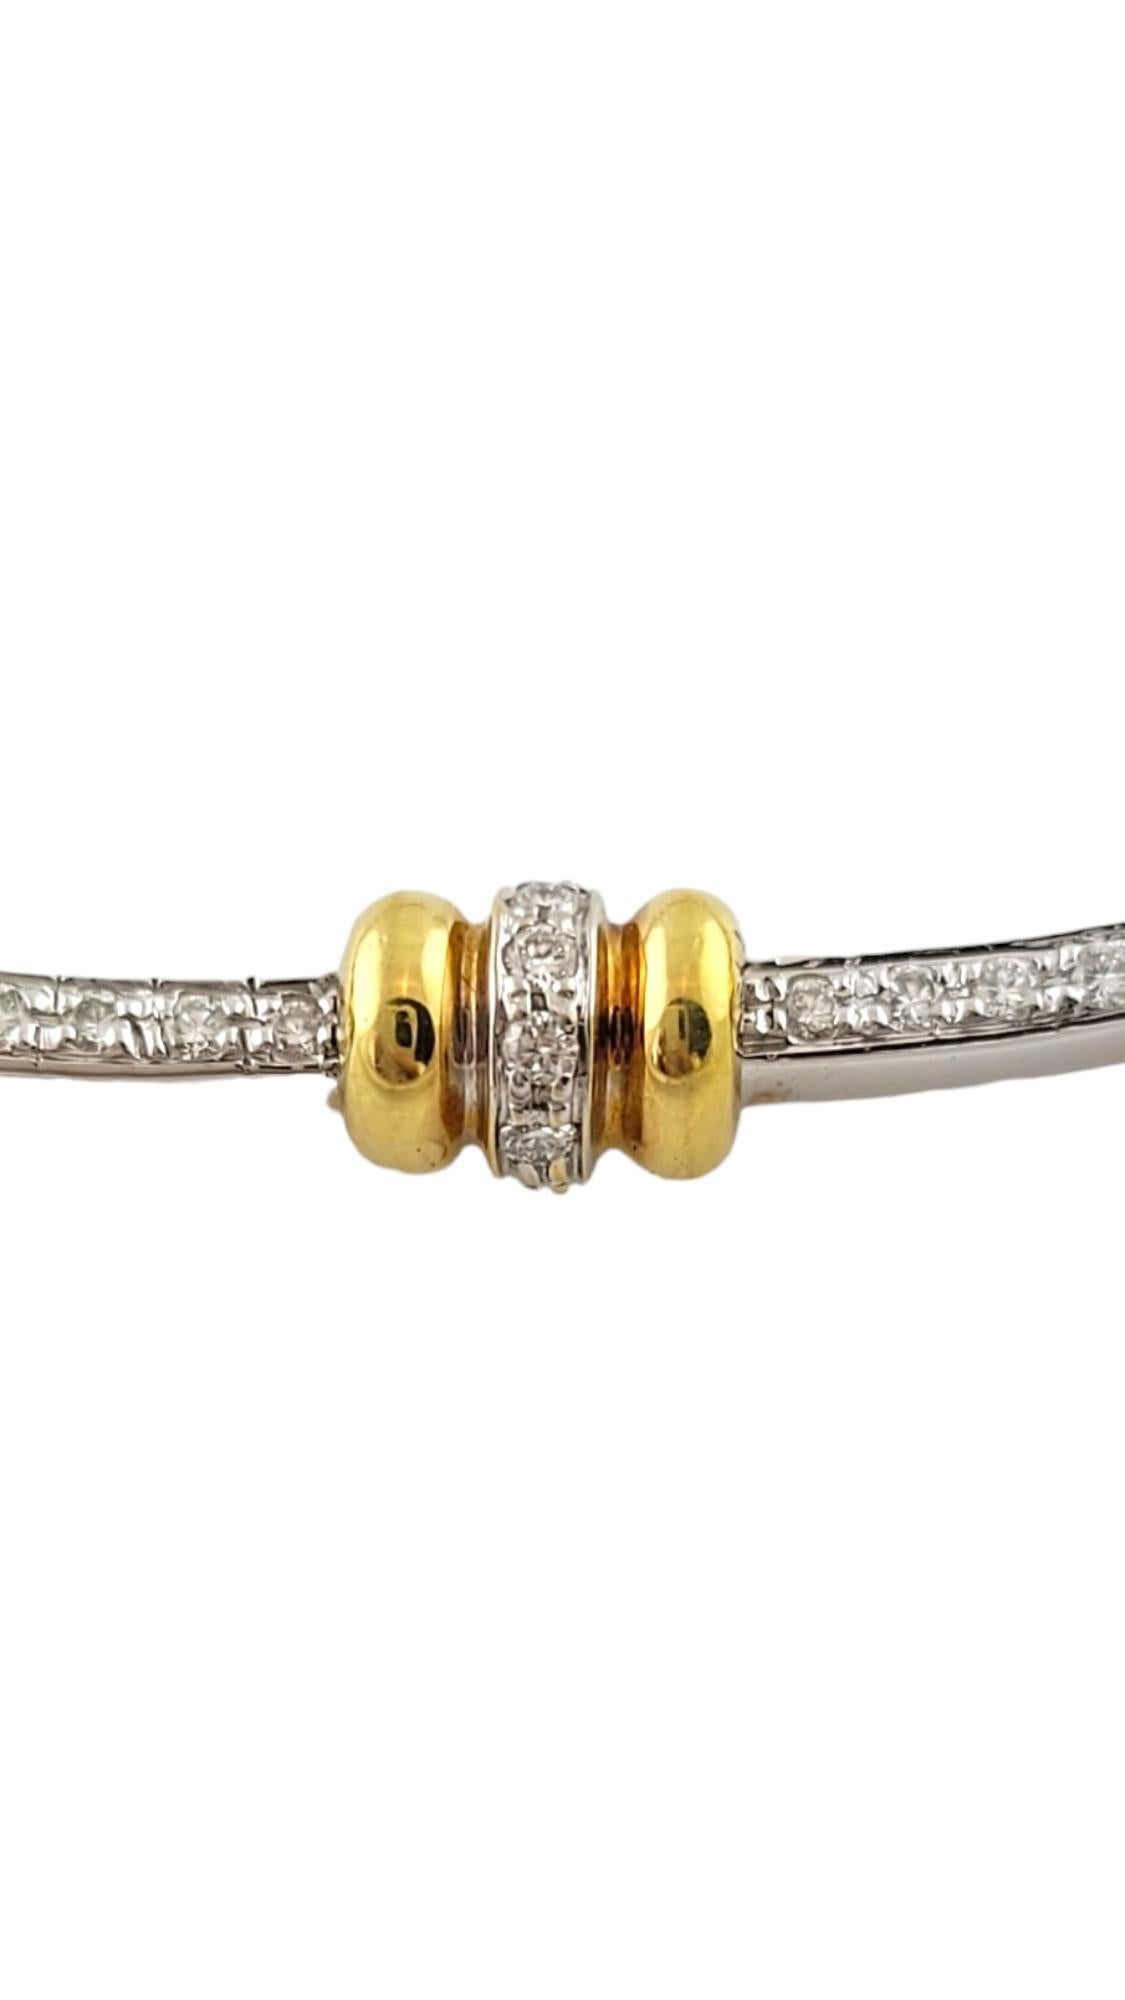 Roberto Coin 18K Yellow and White Gold Diamond Choker Collar Necklace

This classic Roberto Coin choker is set in 18K yellow and white gold

Center of the necklace is set with 75 round brilliant diamonds.

Diamonds are approx. .75cts and of VS1